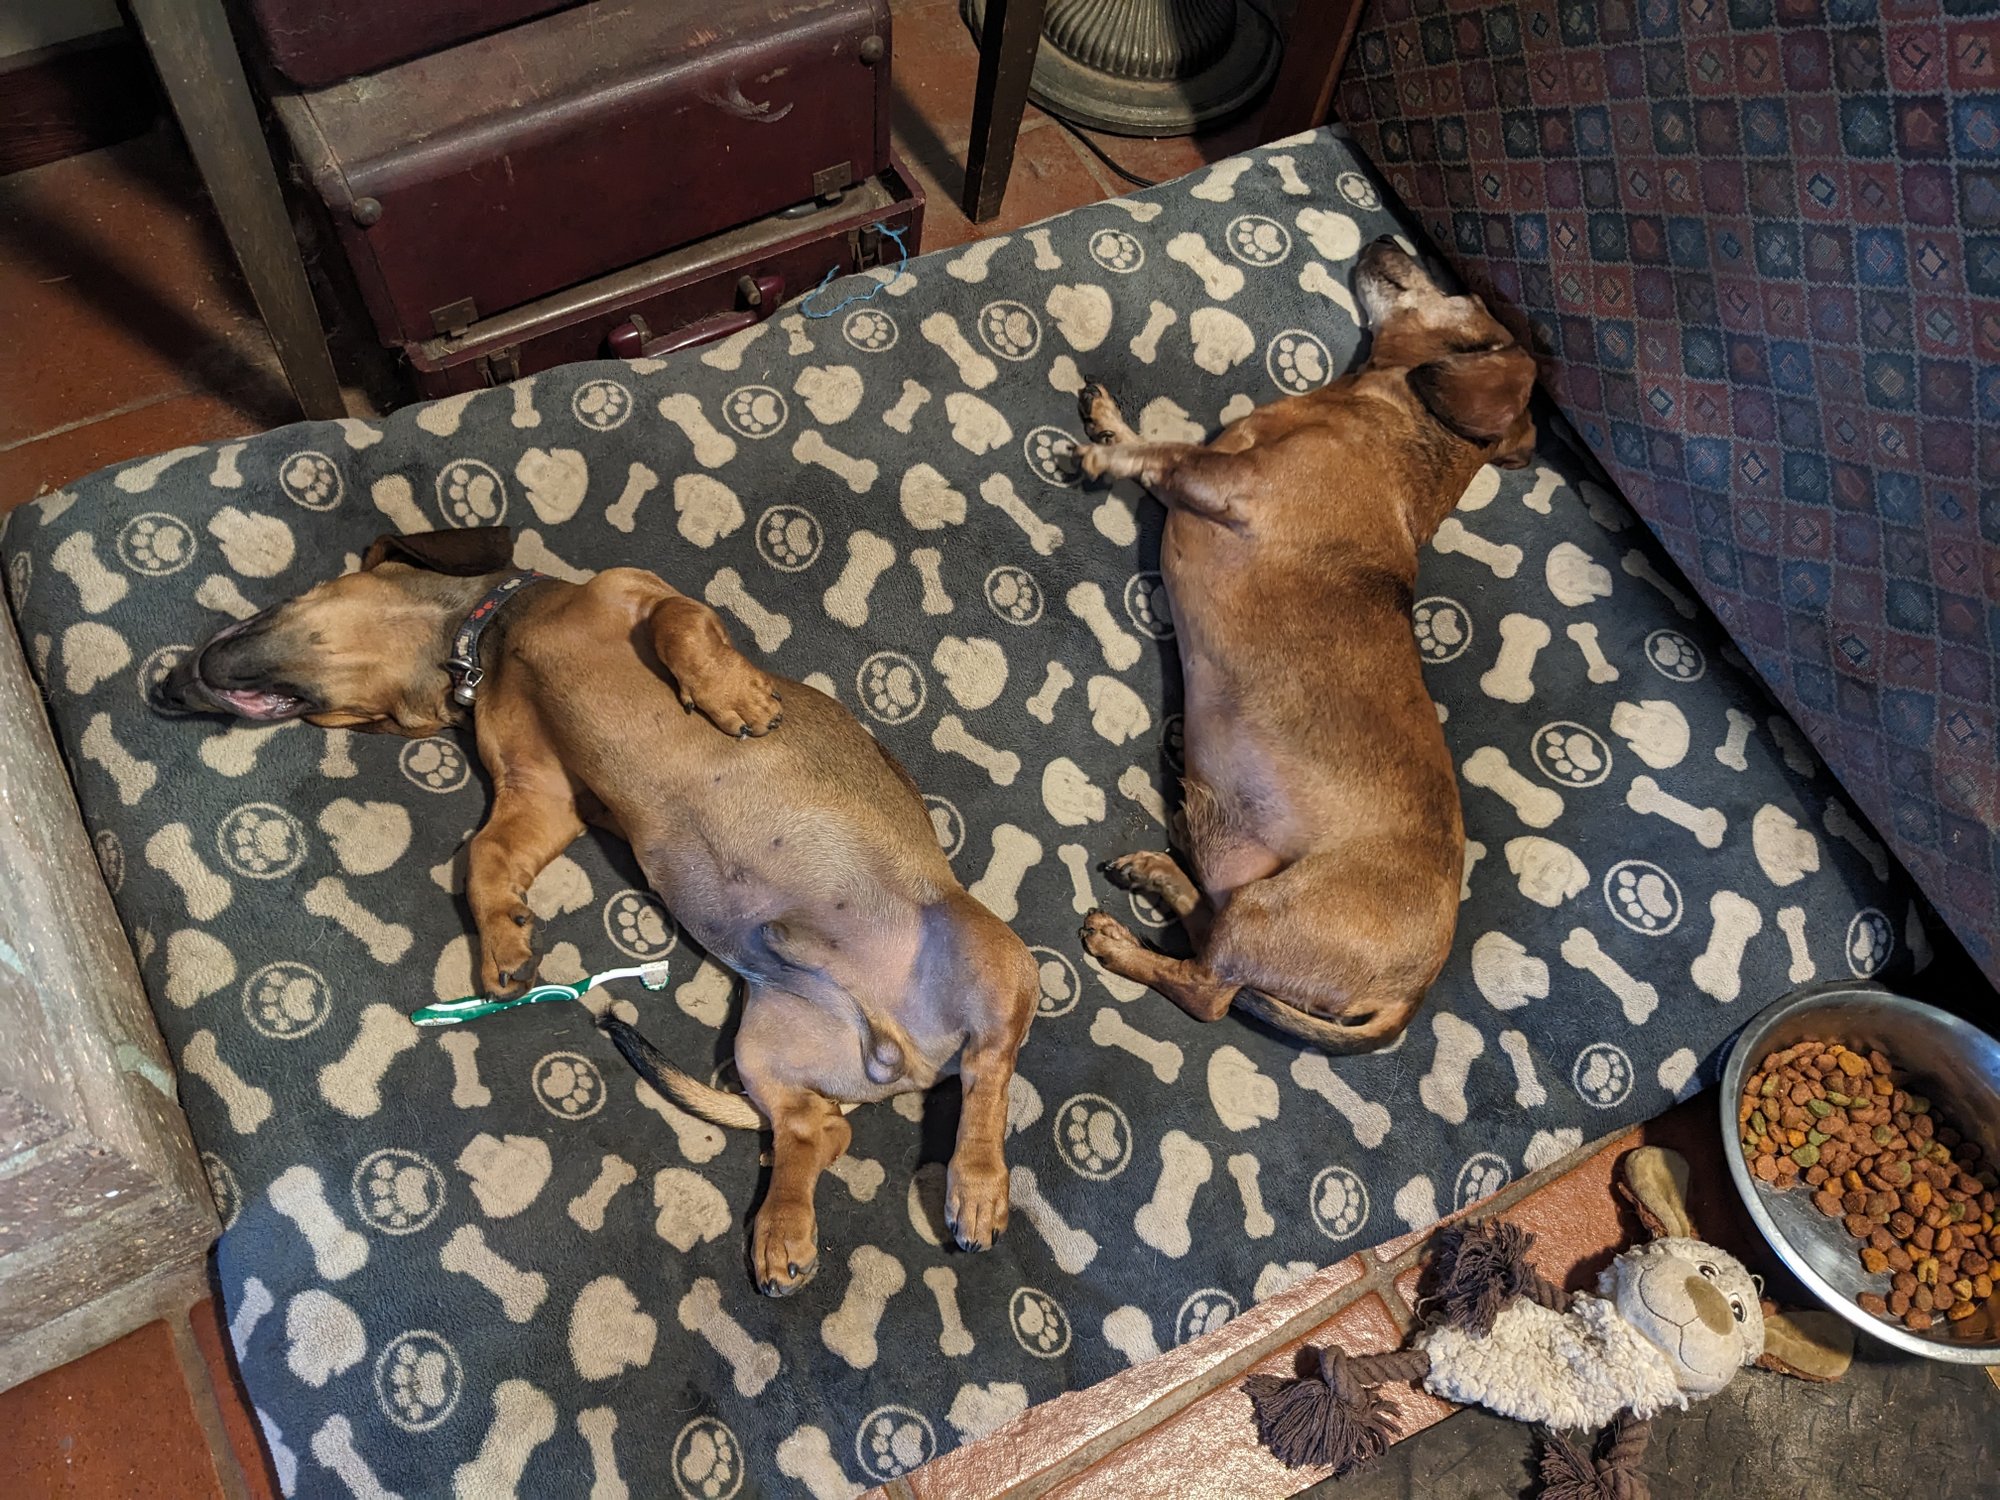 Two dachshunds asleep on a dog bed